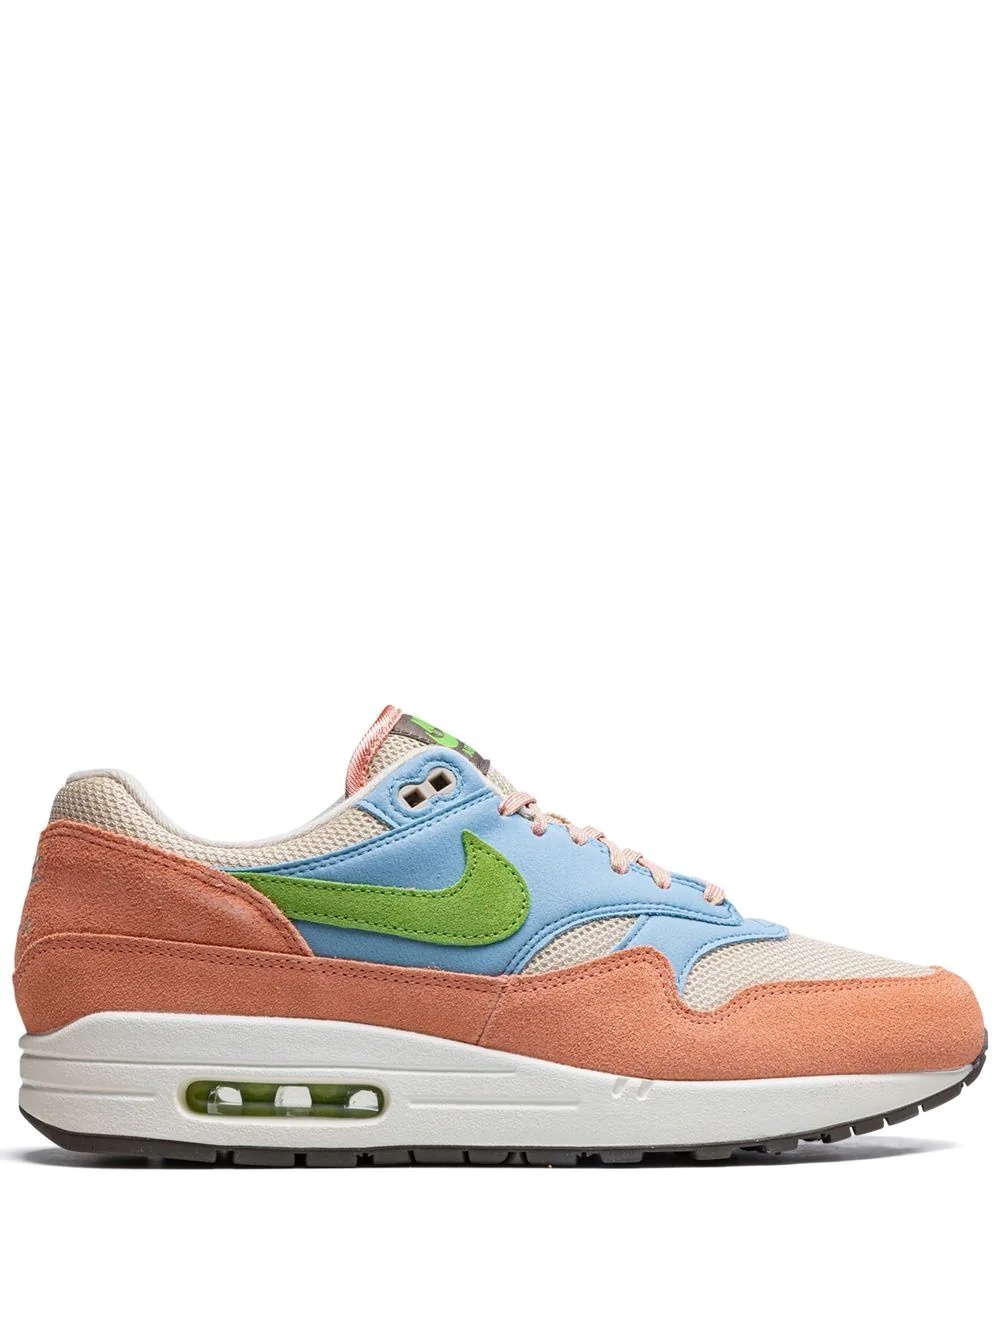 Air Max 1 "Light Madder Root" sneakers - 1